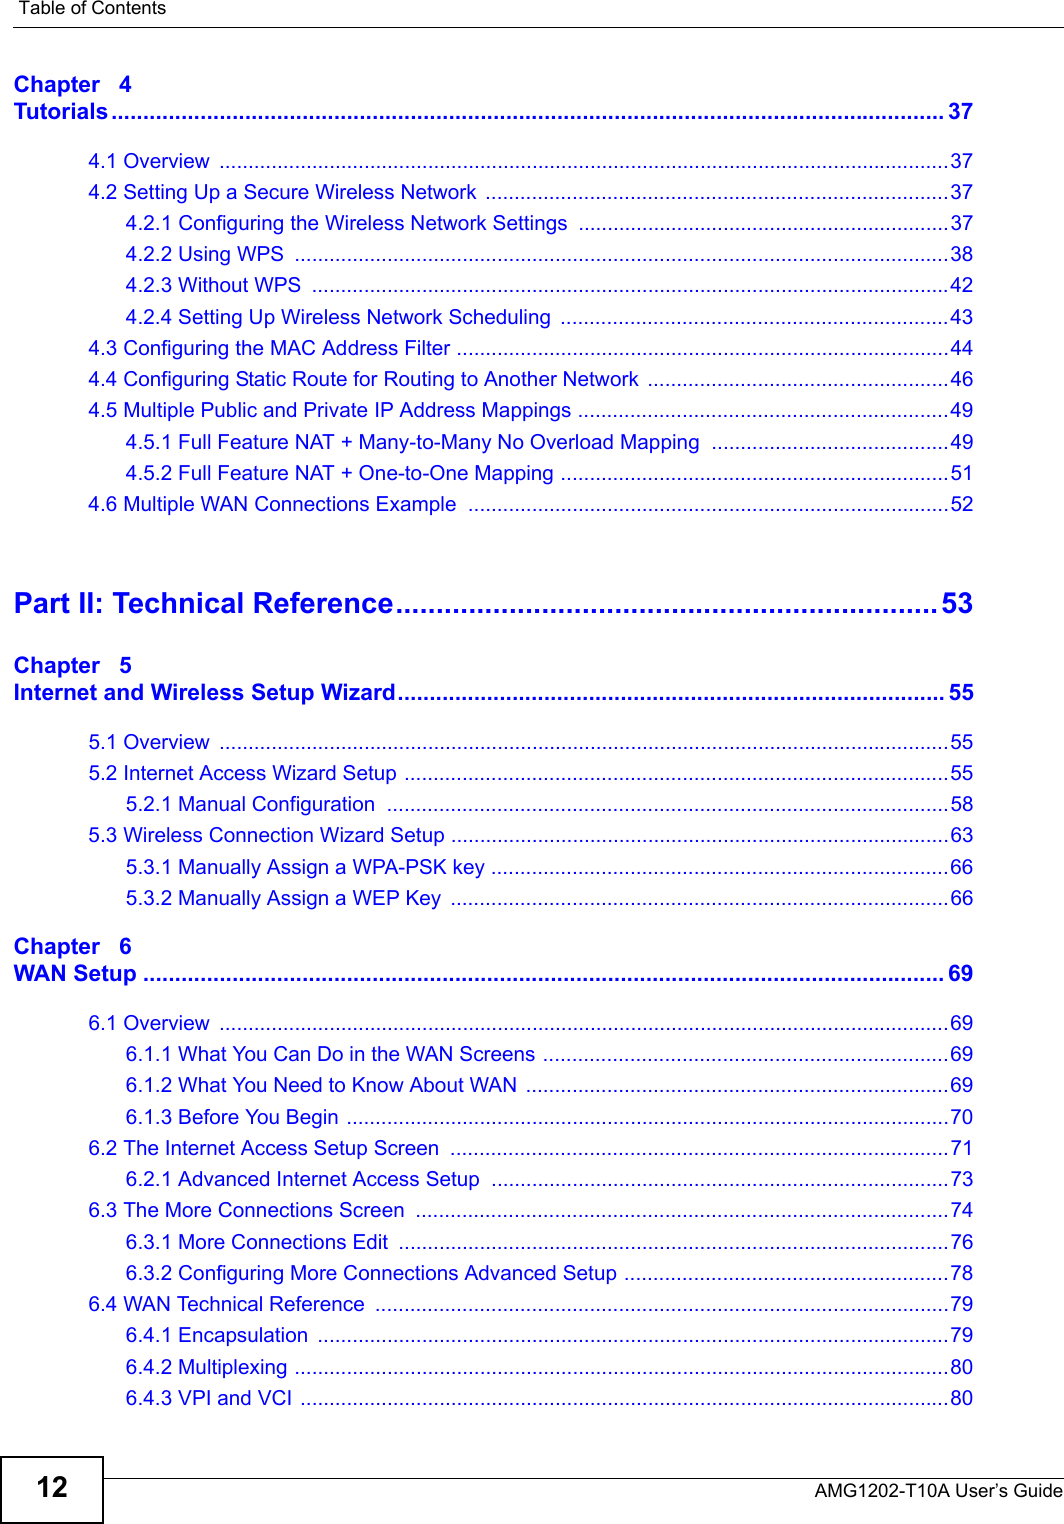 Table of ContentsAMG1202-T10A User’s Guide12Chapter   4Tutorials ................................................................................................................................... 374.1 Overview  ..............................................................................................................................374.2 Setting Up a Secure Wireless Network  ................................................................................374.2.1 Configuring the Wireless Network Settings ................................................................374.2.2 Using WPS  .................................................................................................................384.2.3 Without WPS  ..............................................................................................................424.2.4 Setting Up Wireless Network Scheduling  ...................................................................434.3 Configuring the MAC Address Filter .....................................................................................444.4 Configuring Static Route for Routing to Another Network  ....................................................464.5 Multiple Public and Private IP Address Mappings ................................................................494.5.1 Full Feature NAT + Many-to-Many No Overload Mapping  .........................................494.5.2 Full Feature NAT + One-to-One Mapping ...................................................................514.6 Multiple WAN Connections Example ...................................................................................52Part II: Technical Reference...................................................................53Chapter   5Internet and Wireless Setup Wizard...................................................................................... 555.1 Overview  ..............................................................................................................................555.2 Internet Access Wizard Setup ..............................................................................................555.2.1 Manual Configuration  .................................................................................................585.3 Wireless Connection Wizard Setup ......................................................................................635.3.1 Manually Assign a WPA-PSK key ...............................................................................665.3.2 Manually Assign a WEP Key  ......................................................................................66Chapter   6WAN Setup .............................................................................................................................. 696.1 Overview  ..............................................................................................................................696.1.1 What You Can Do in the WAN Screens ......................................................................696.1.2 What You Need to Know About WAN  .........................................................................696.1.3 Before You Begin ........................................................................................................706.2 The Internet Access Setup Screen  ......................................................................................716.2.1 Advanced Internet Access Setup  ...............................................................................736.3 The More Connections Screen  ............................................................................................746.3.1 More Connections Edit  ...............................................................................................766.3.2 Configuring More Connections Advanced Setup ........................................................786.4 WAN Technical Reference  ...................................................................................................796.4.1 Encapsulation  .............................................................................................................796.4.2 Multiplexing .................................................................................................................806.4.3 VPI and VCI ................................................................................................................80